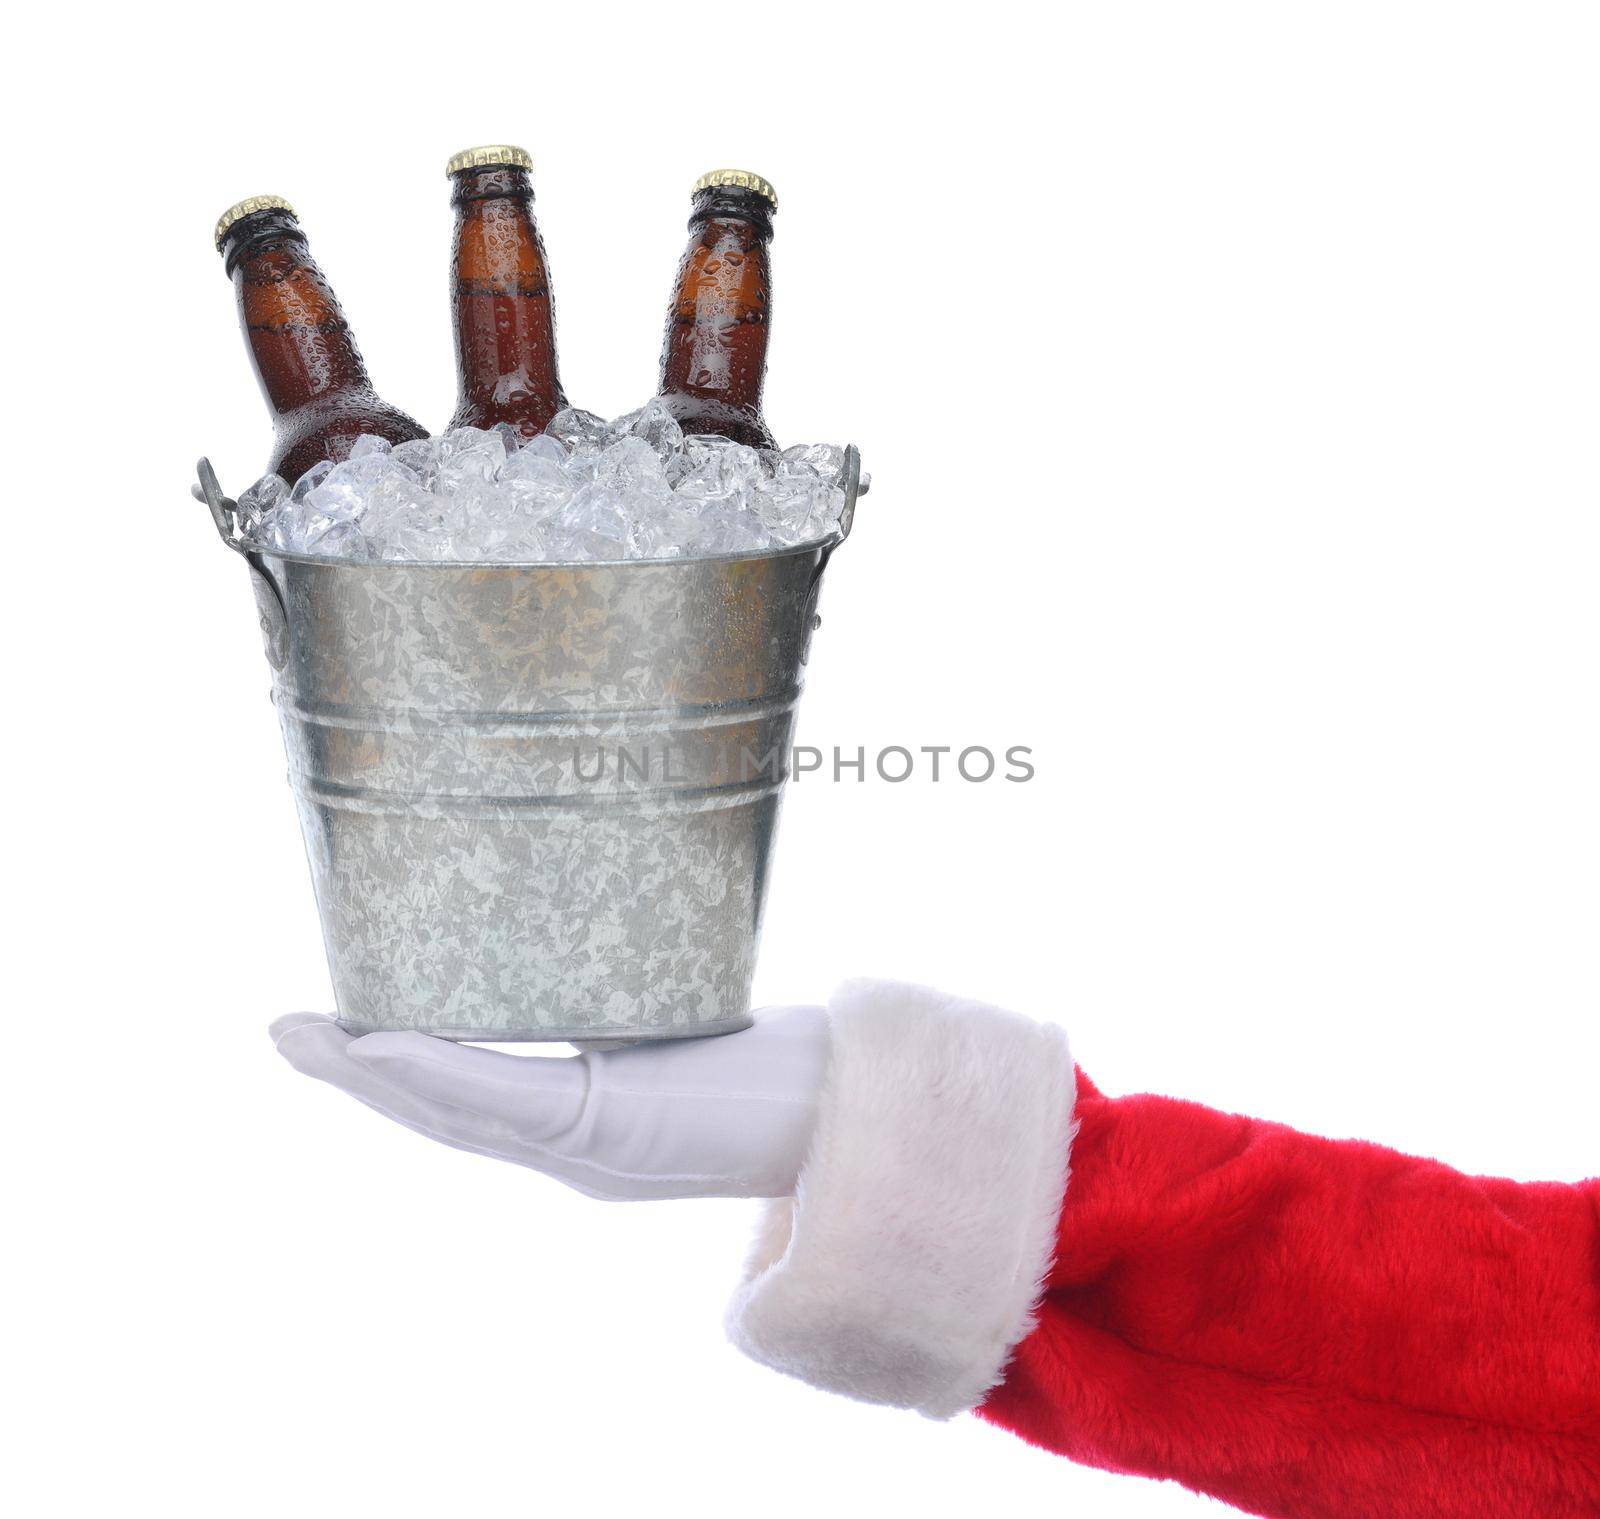 Santa Claus outstretched arm holding a bucket of beer in his hand. Square format over a white background.